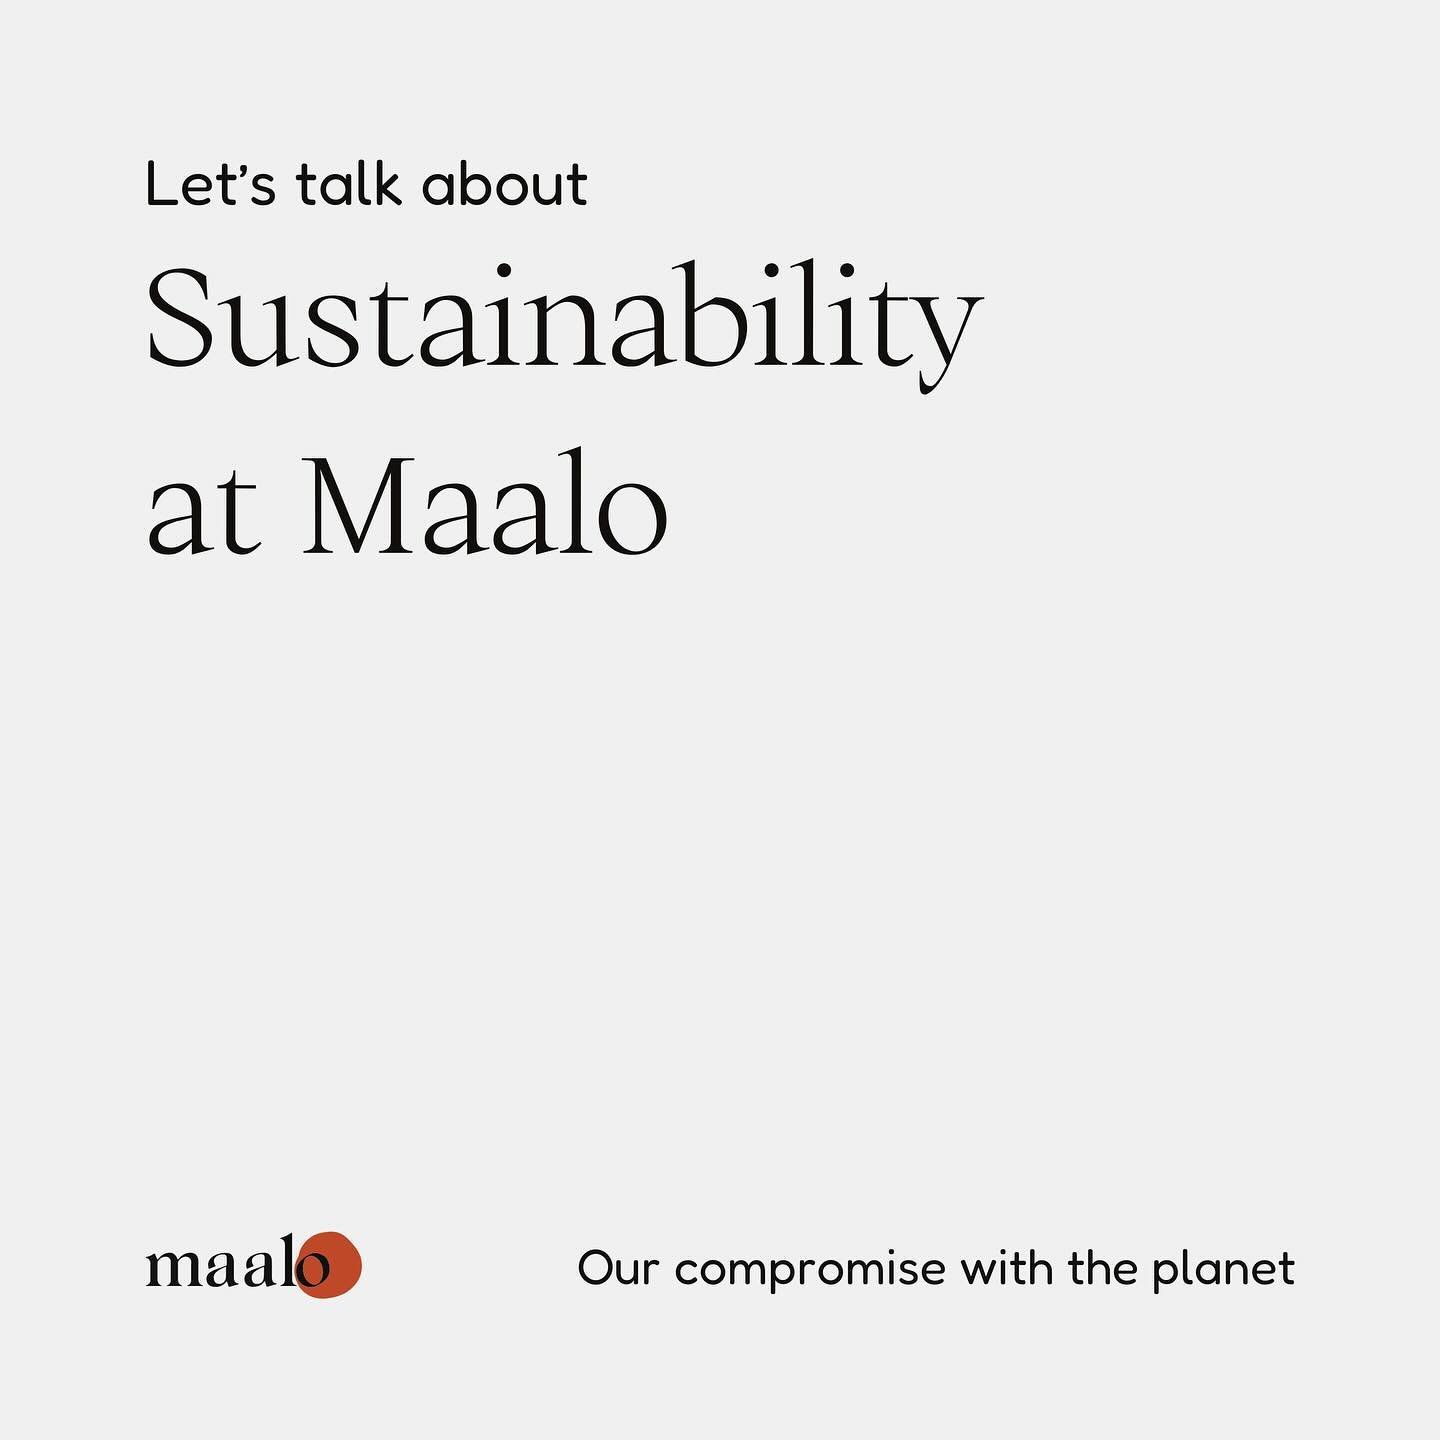 ♻️♻️♻️♻️
Each piece is handcrafted and cast in small batches with recycled silver or gold in London. Not only does this avoid over-production, it also enables us to create as little environmental impact as possible. 

Learn more about Maloo in link i